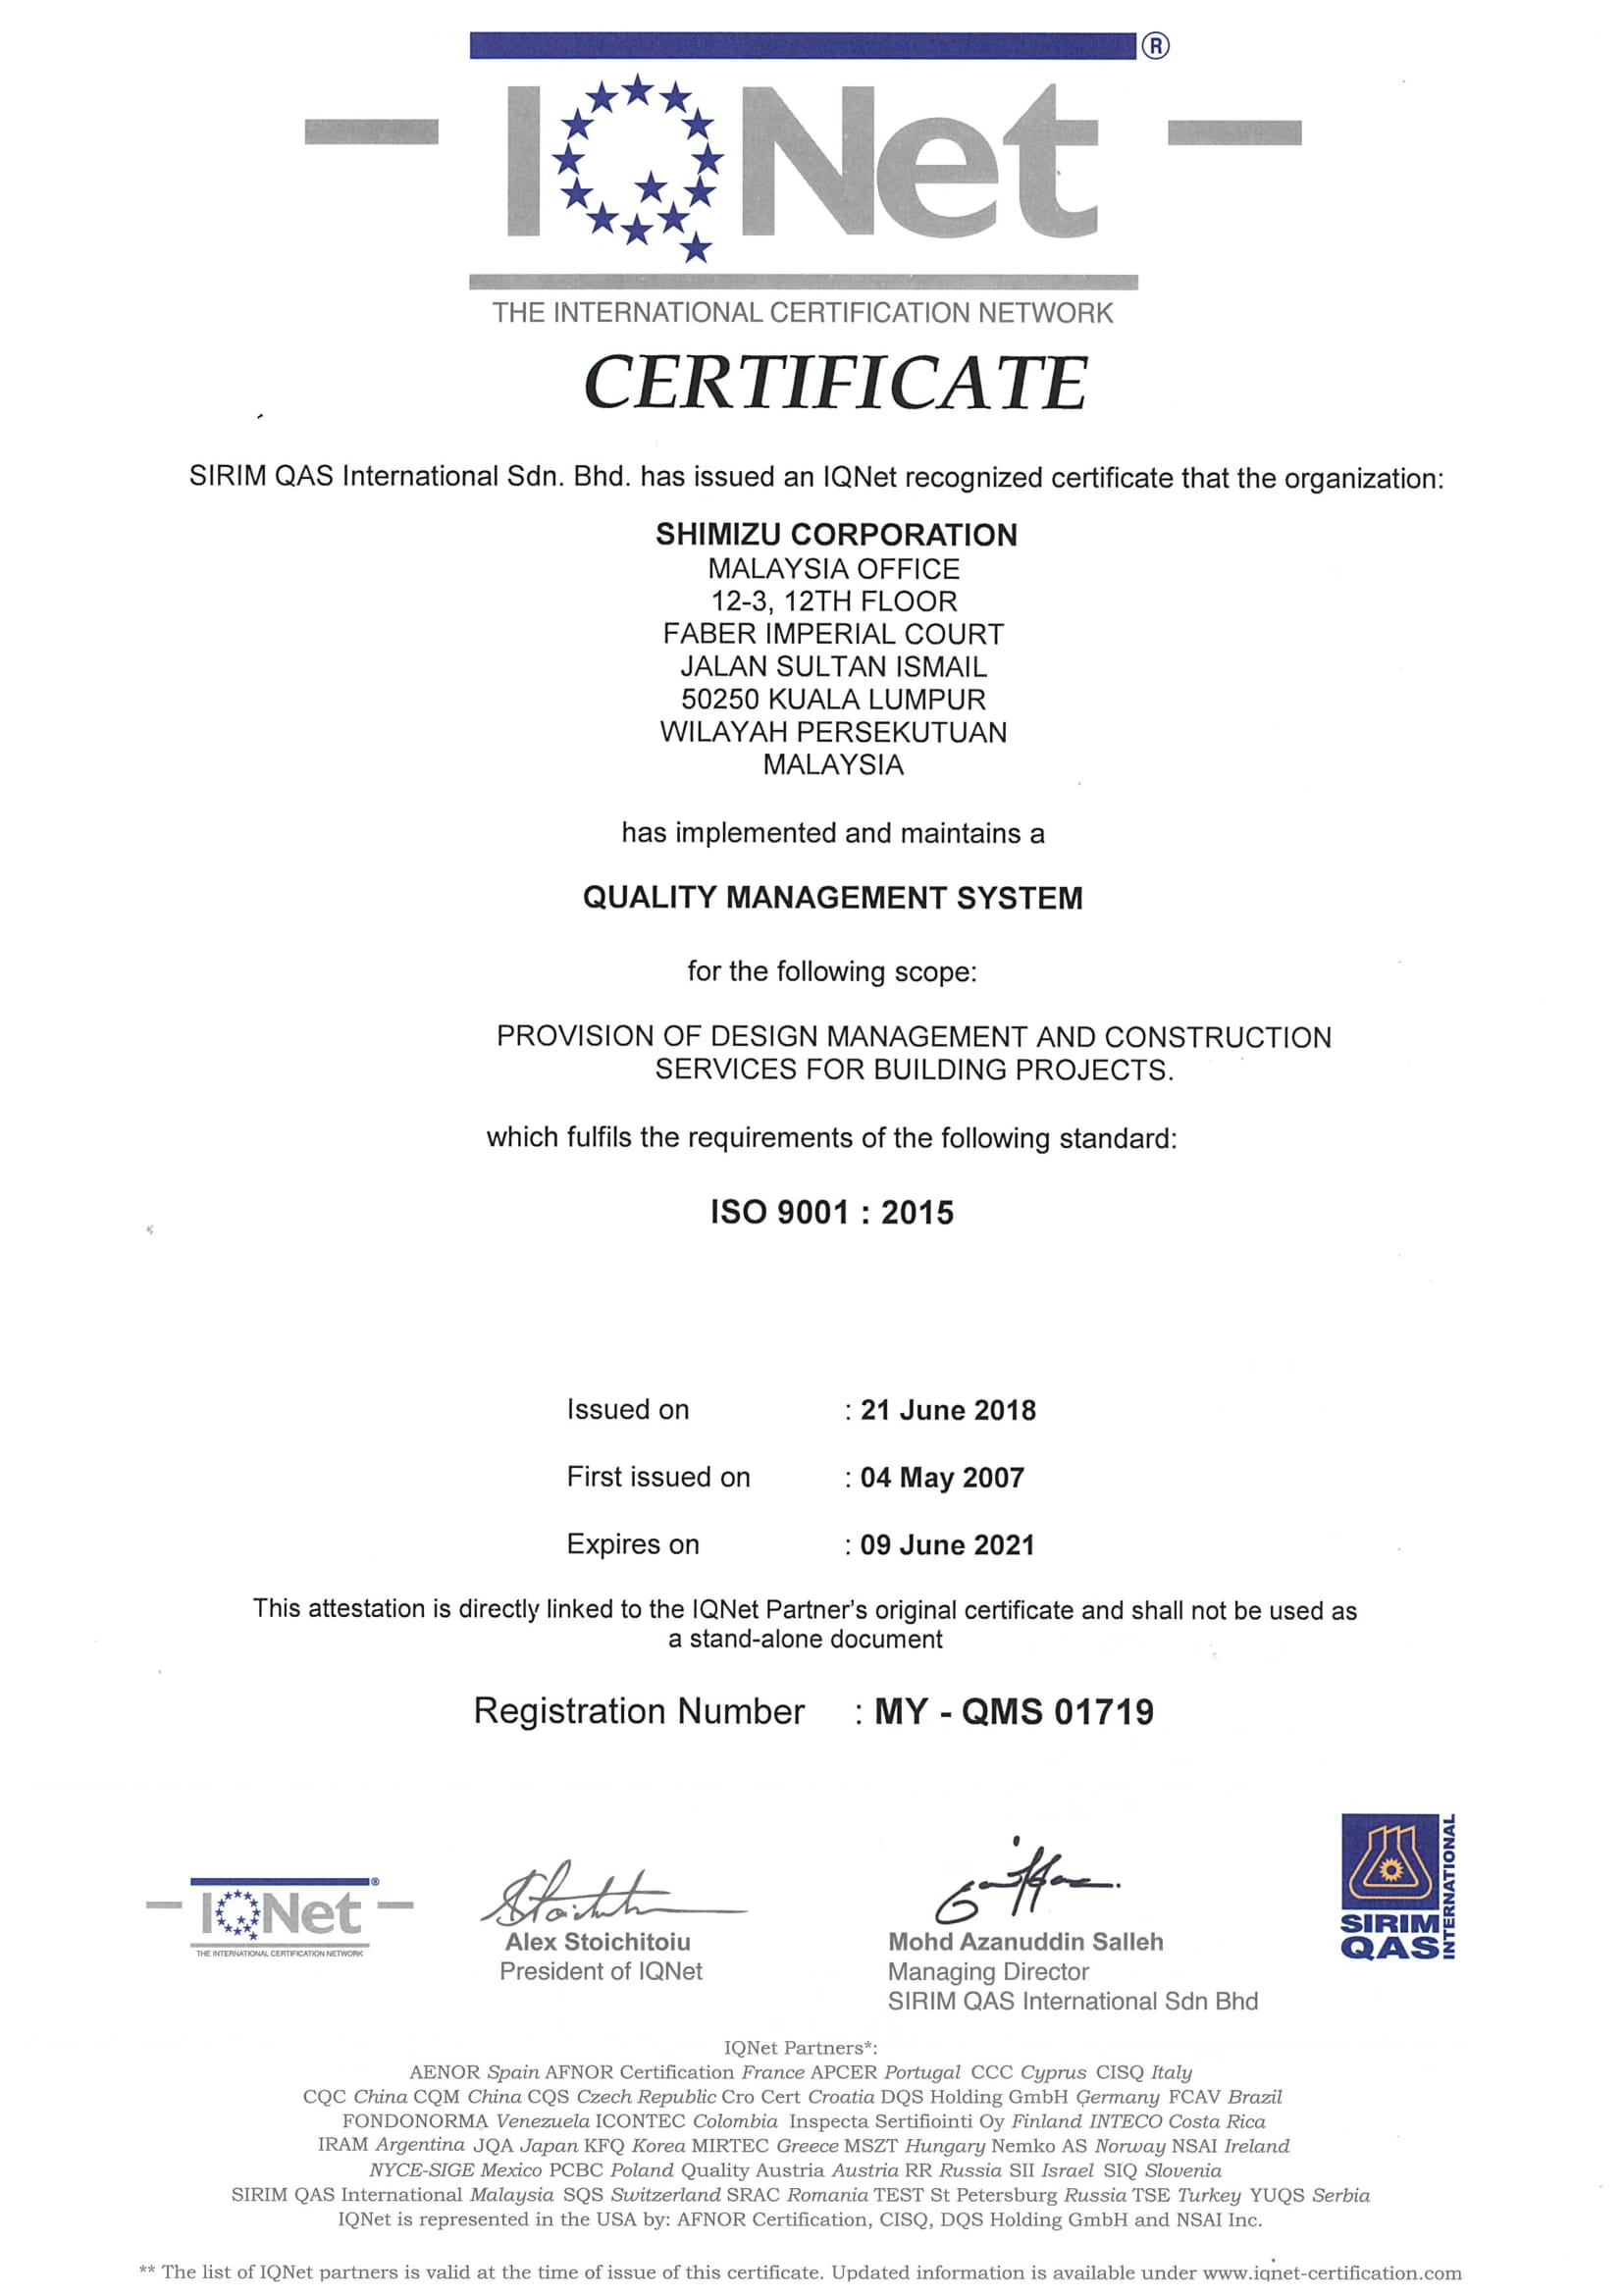 Certified ISO9001:2015 & IQNET by SIRIM QAS